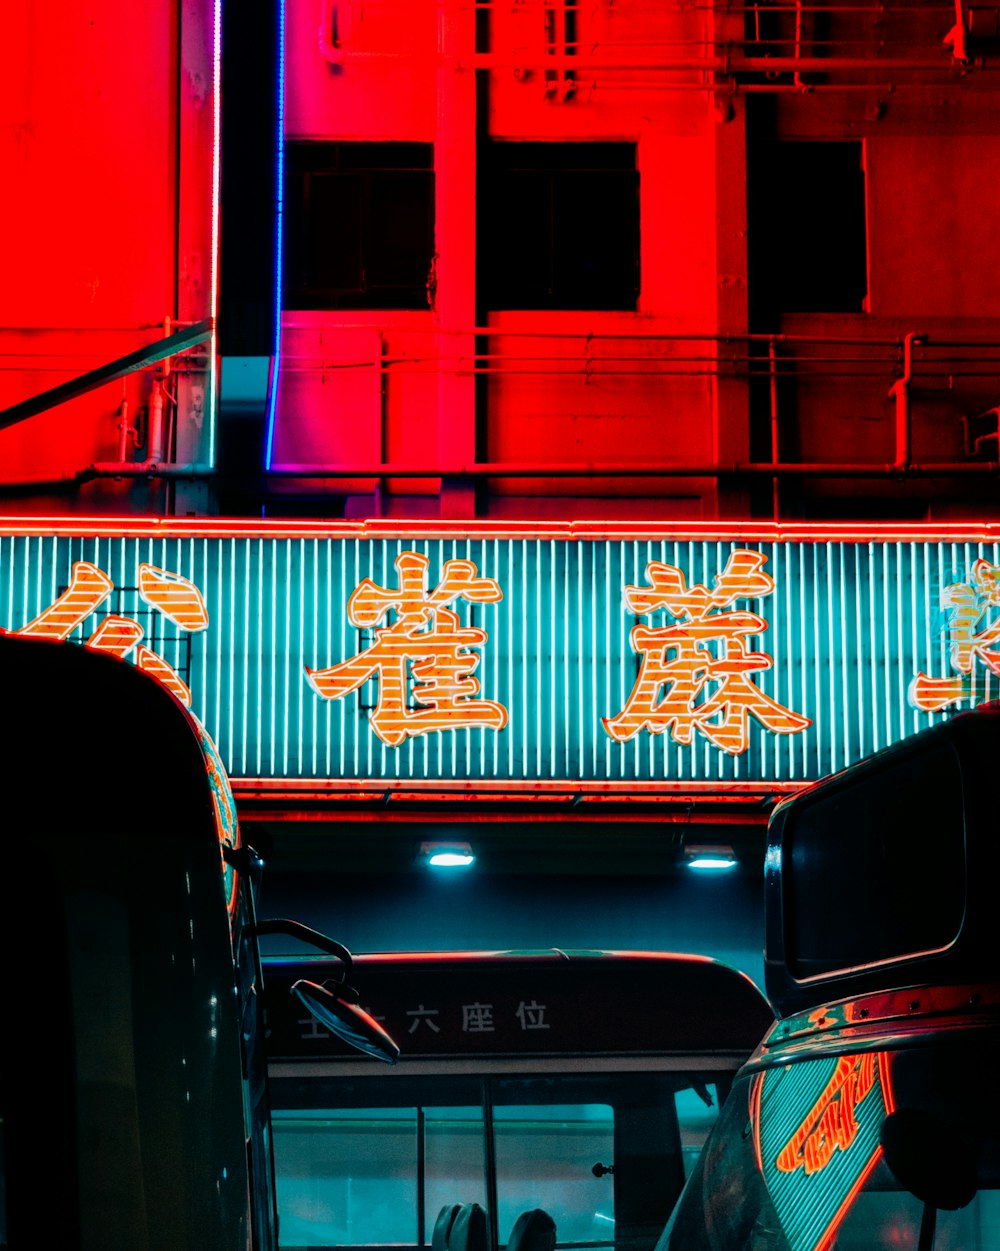 LED kanji script sign turned on on building near vehicles during night